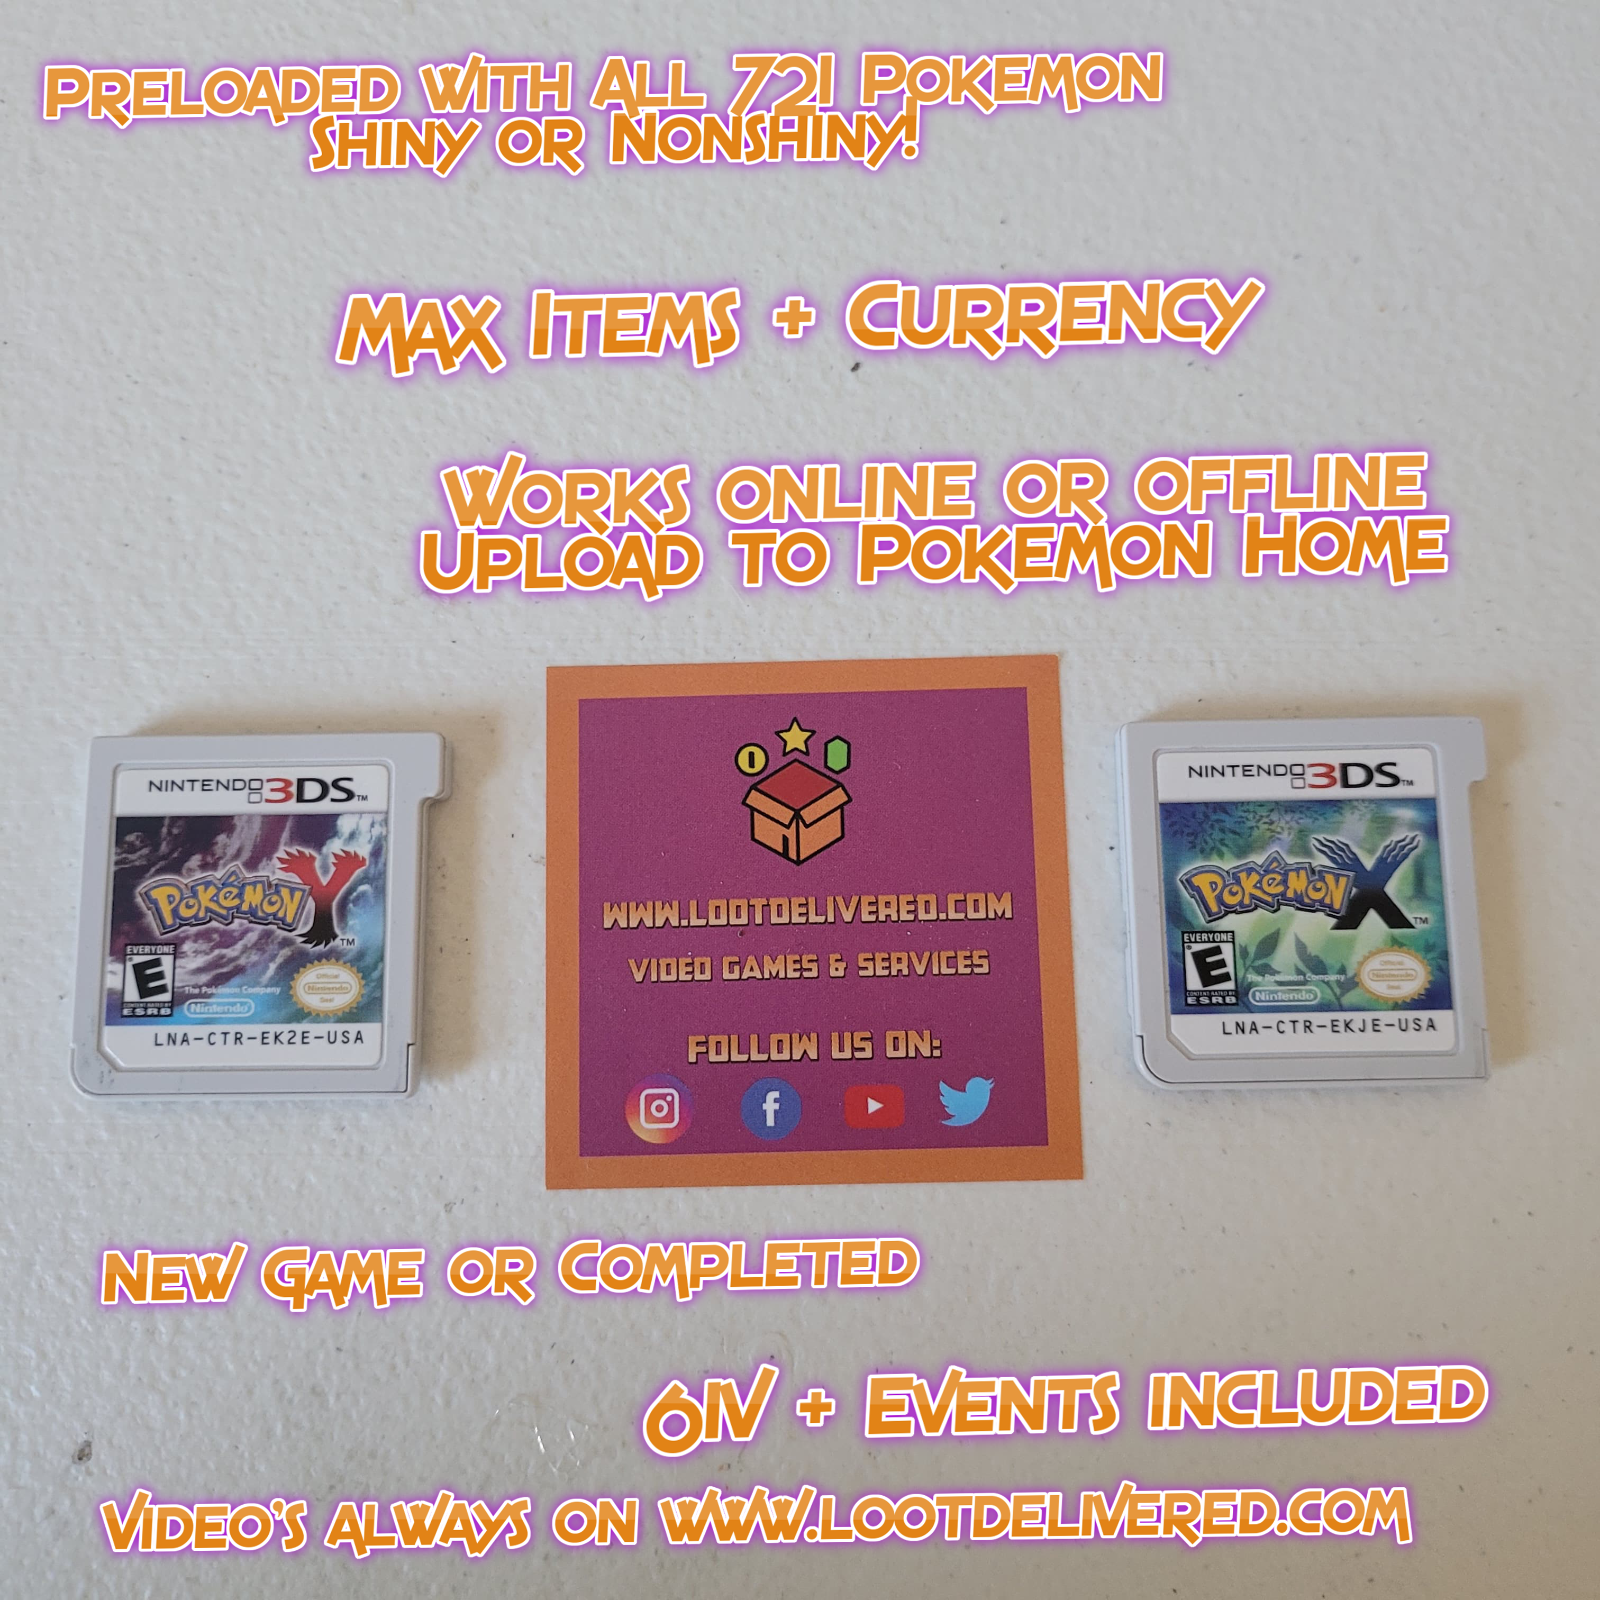 Pokemon Y 3DS Enhanced! (Physcial - Event Game) Enhanced Loaded + Legit 721 With All Pokemon